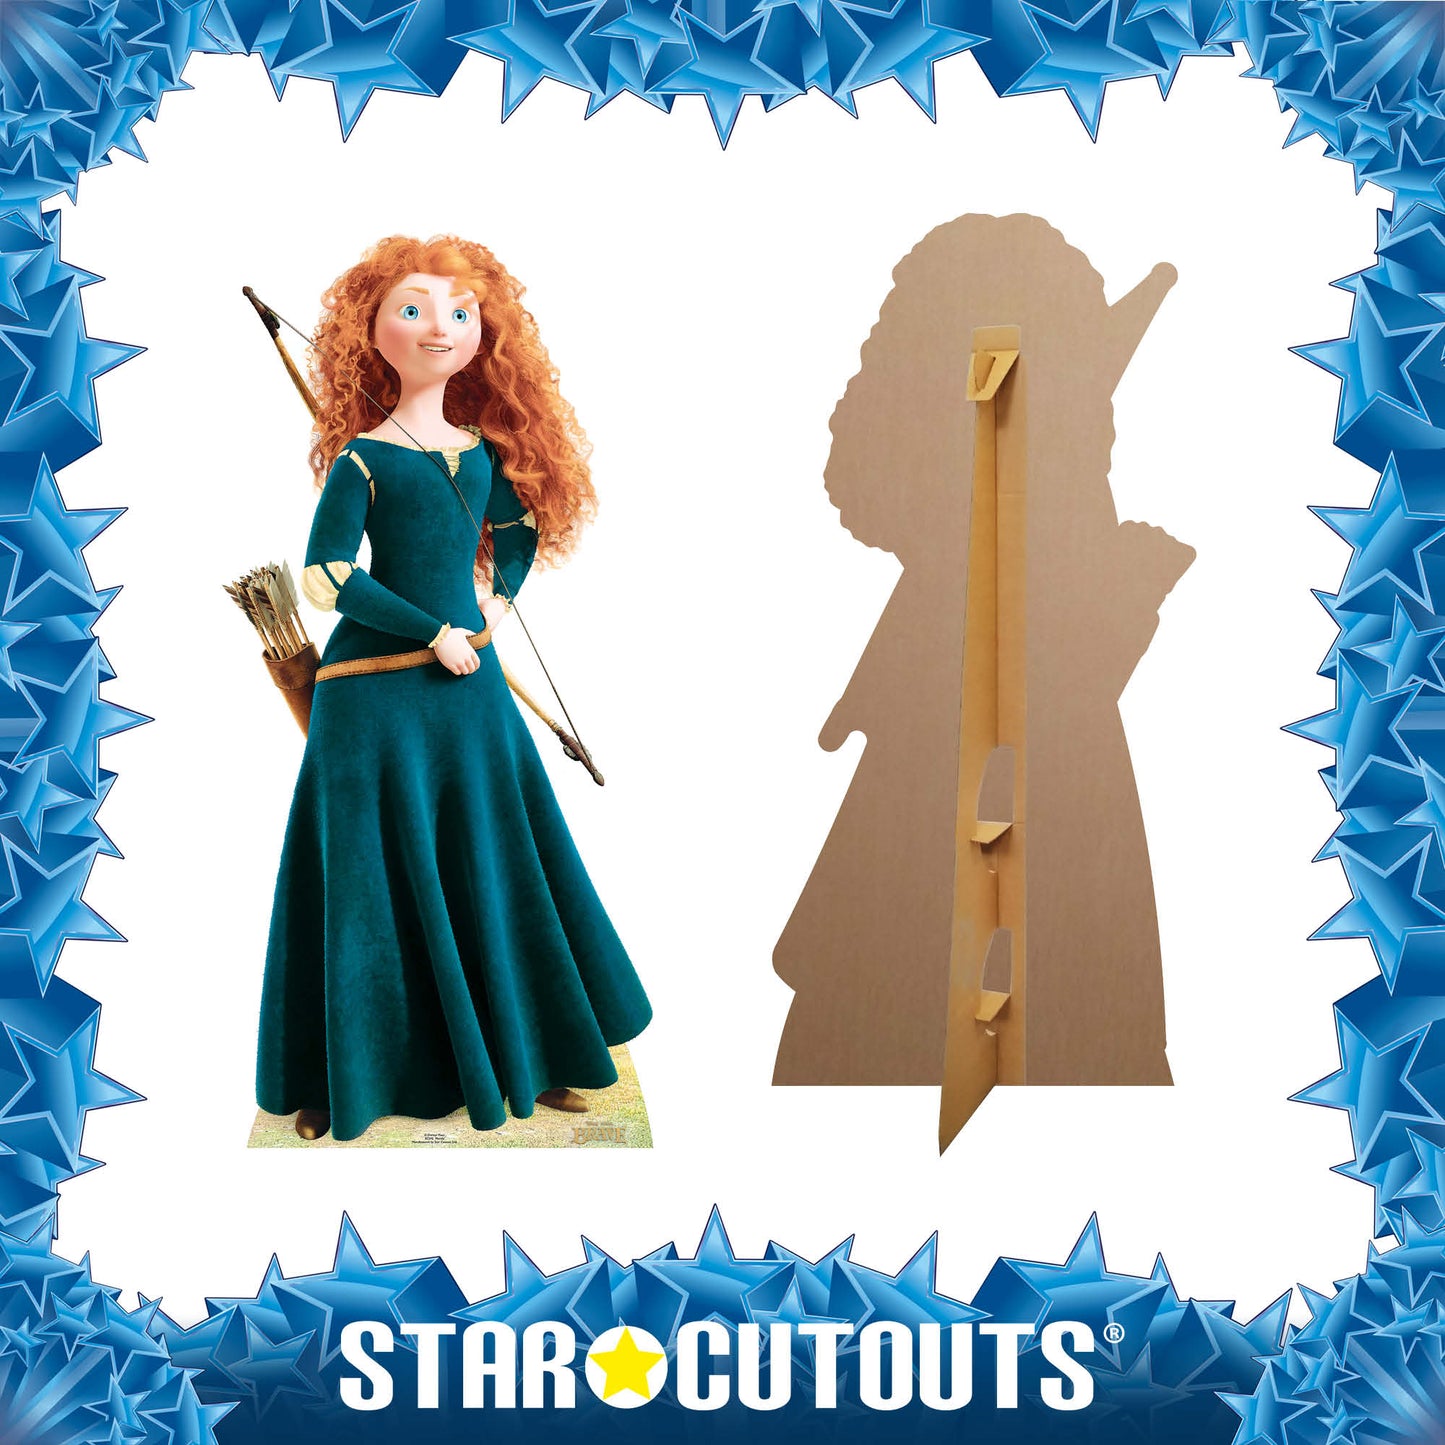 SC542 Merida - Brave cut-out Cardboard Cut Out Height 150cm